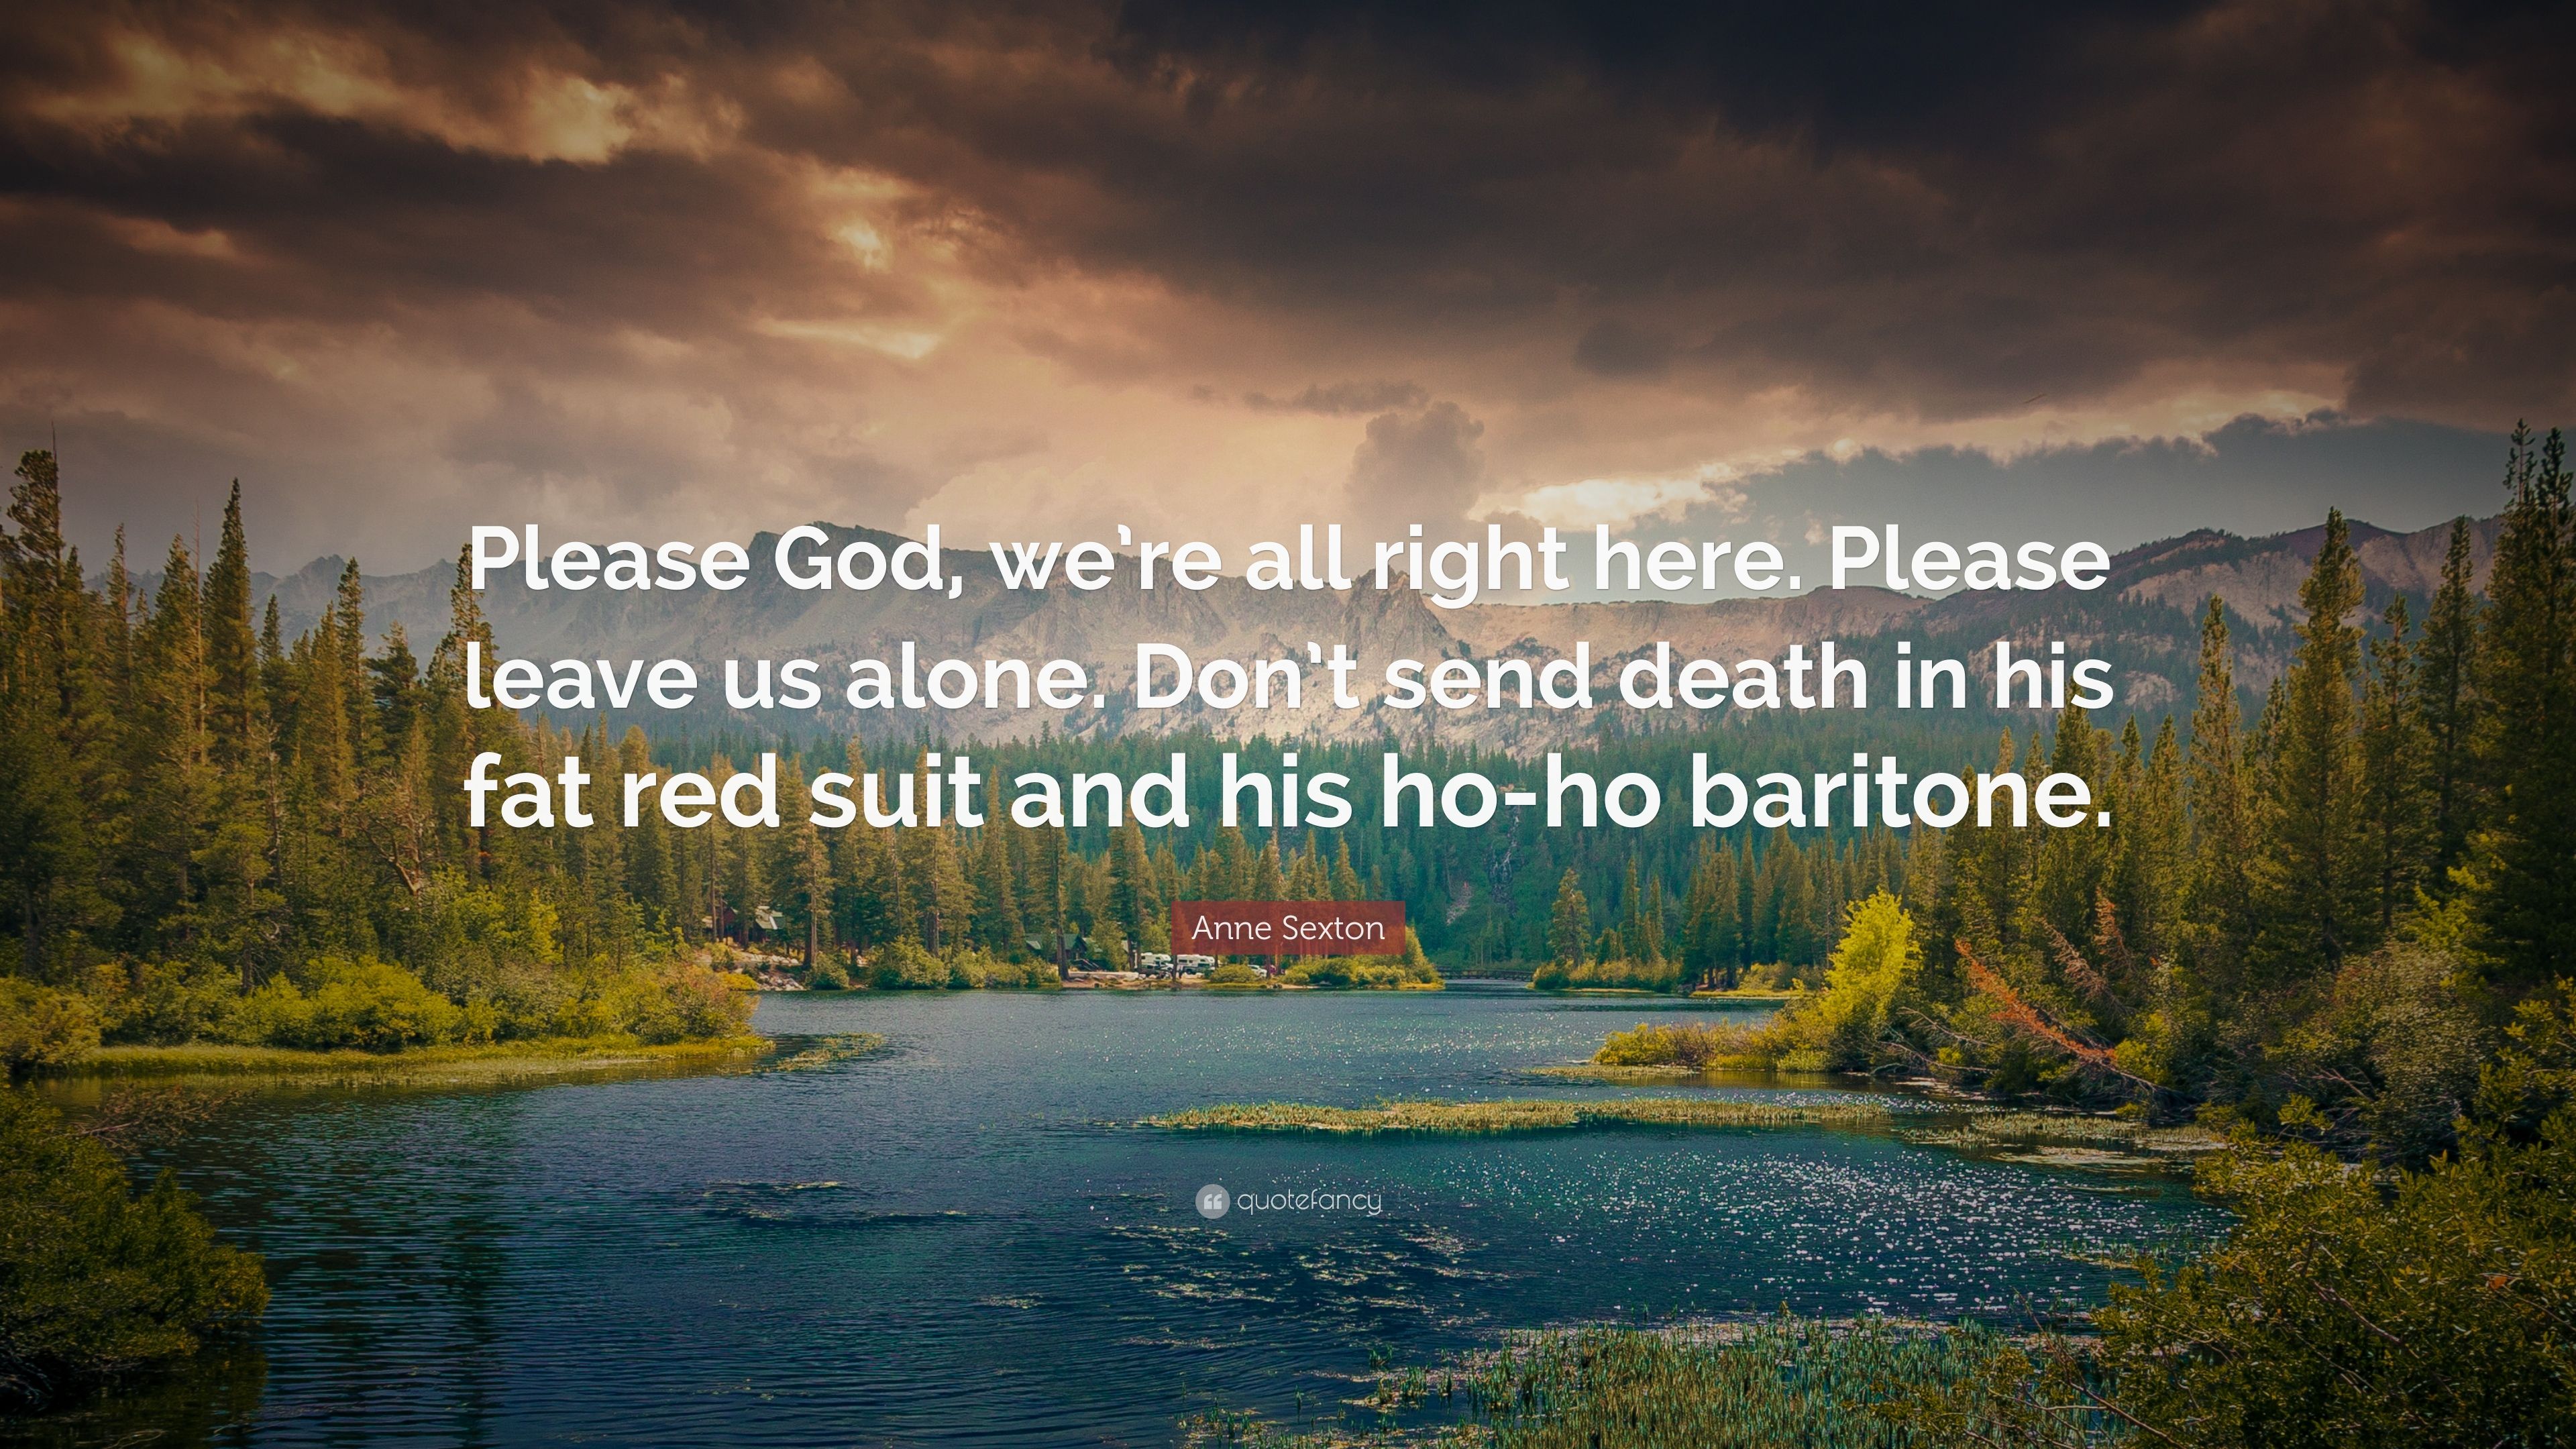 Anne Sexton Quote: “Please God, we're all right here. Please leave